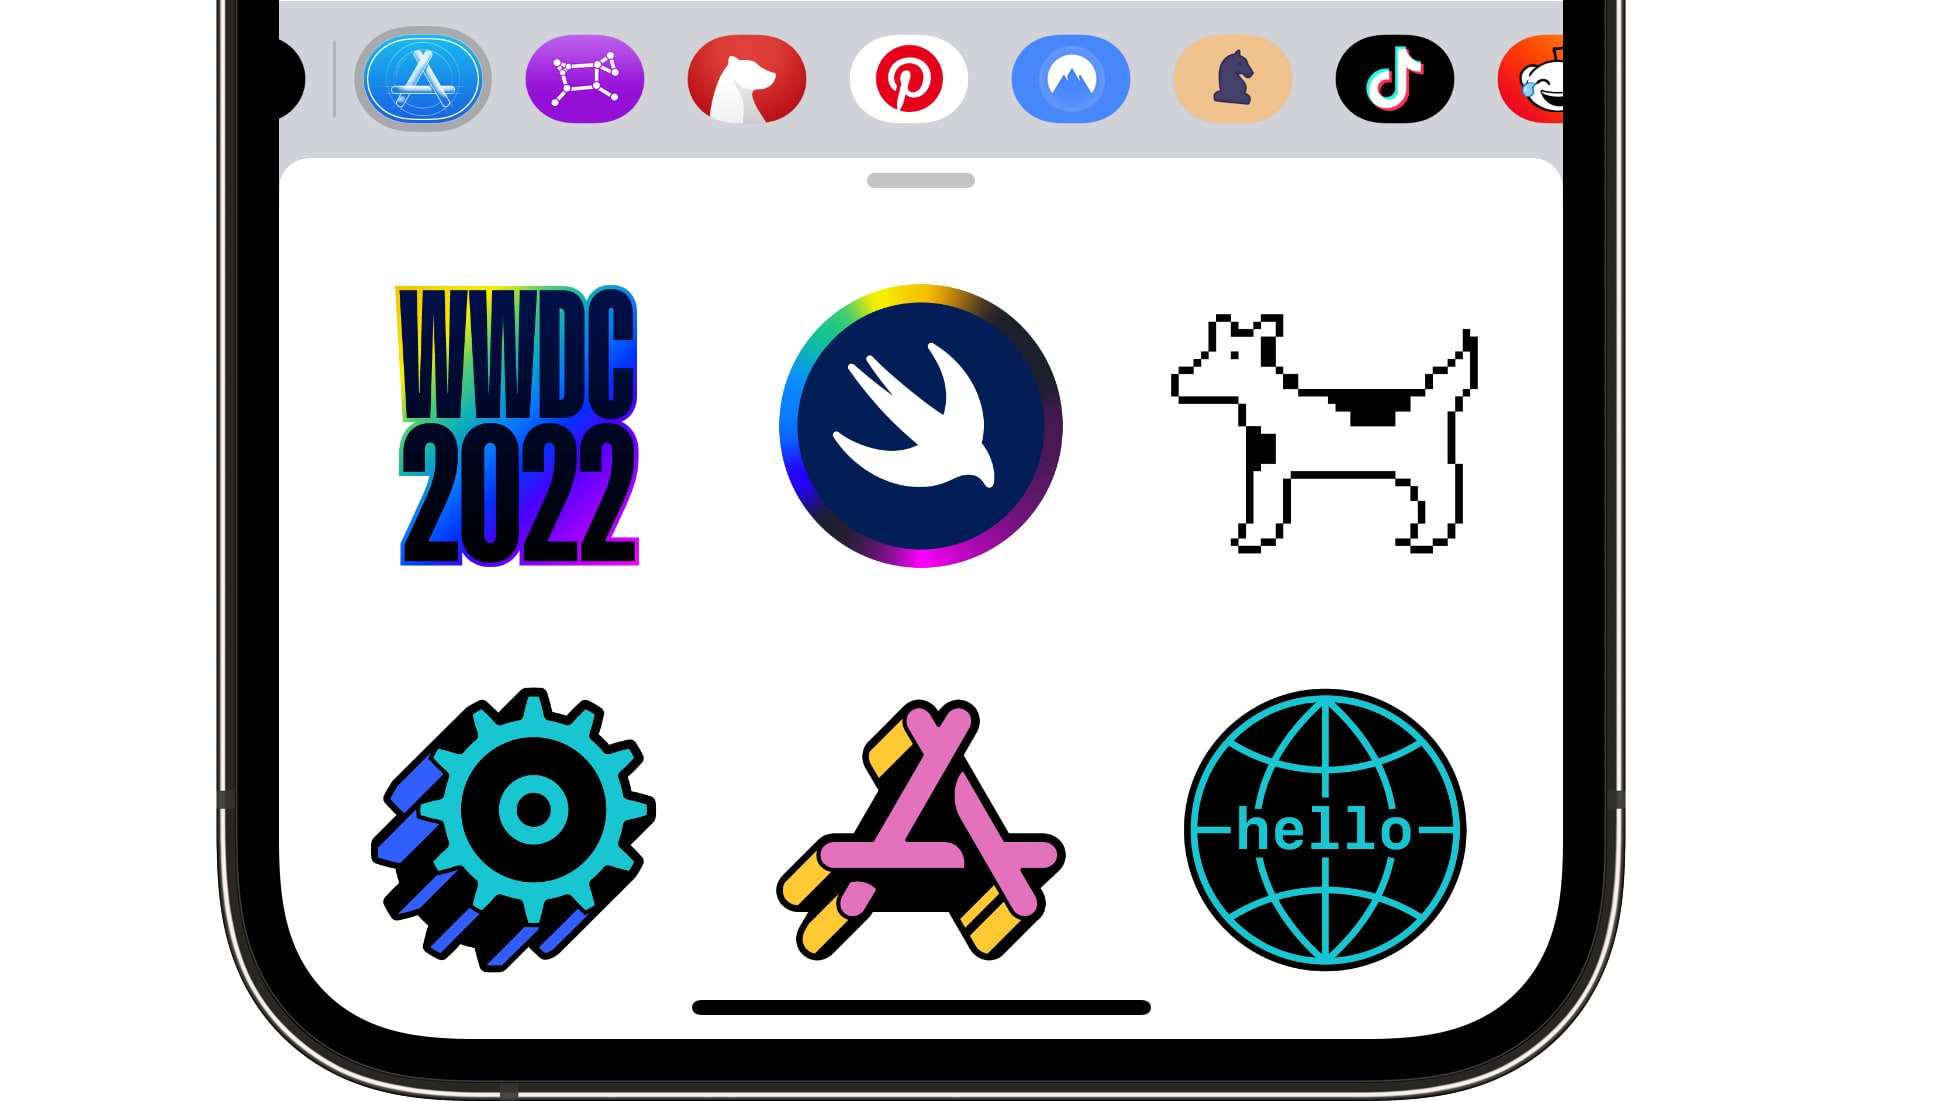 The official WWDC 2022 stickers in the app drawer of the Messages app are showcased in this iPhone screenshot